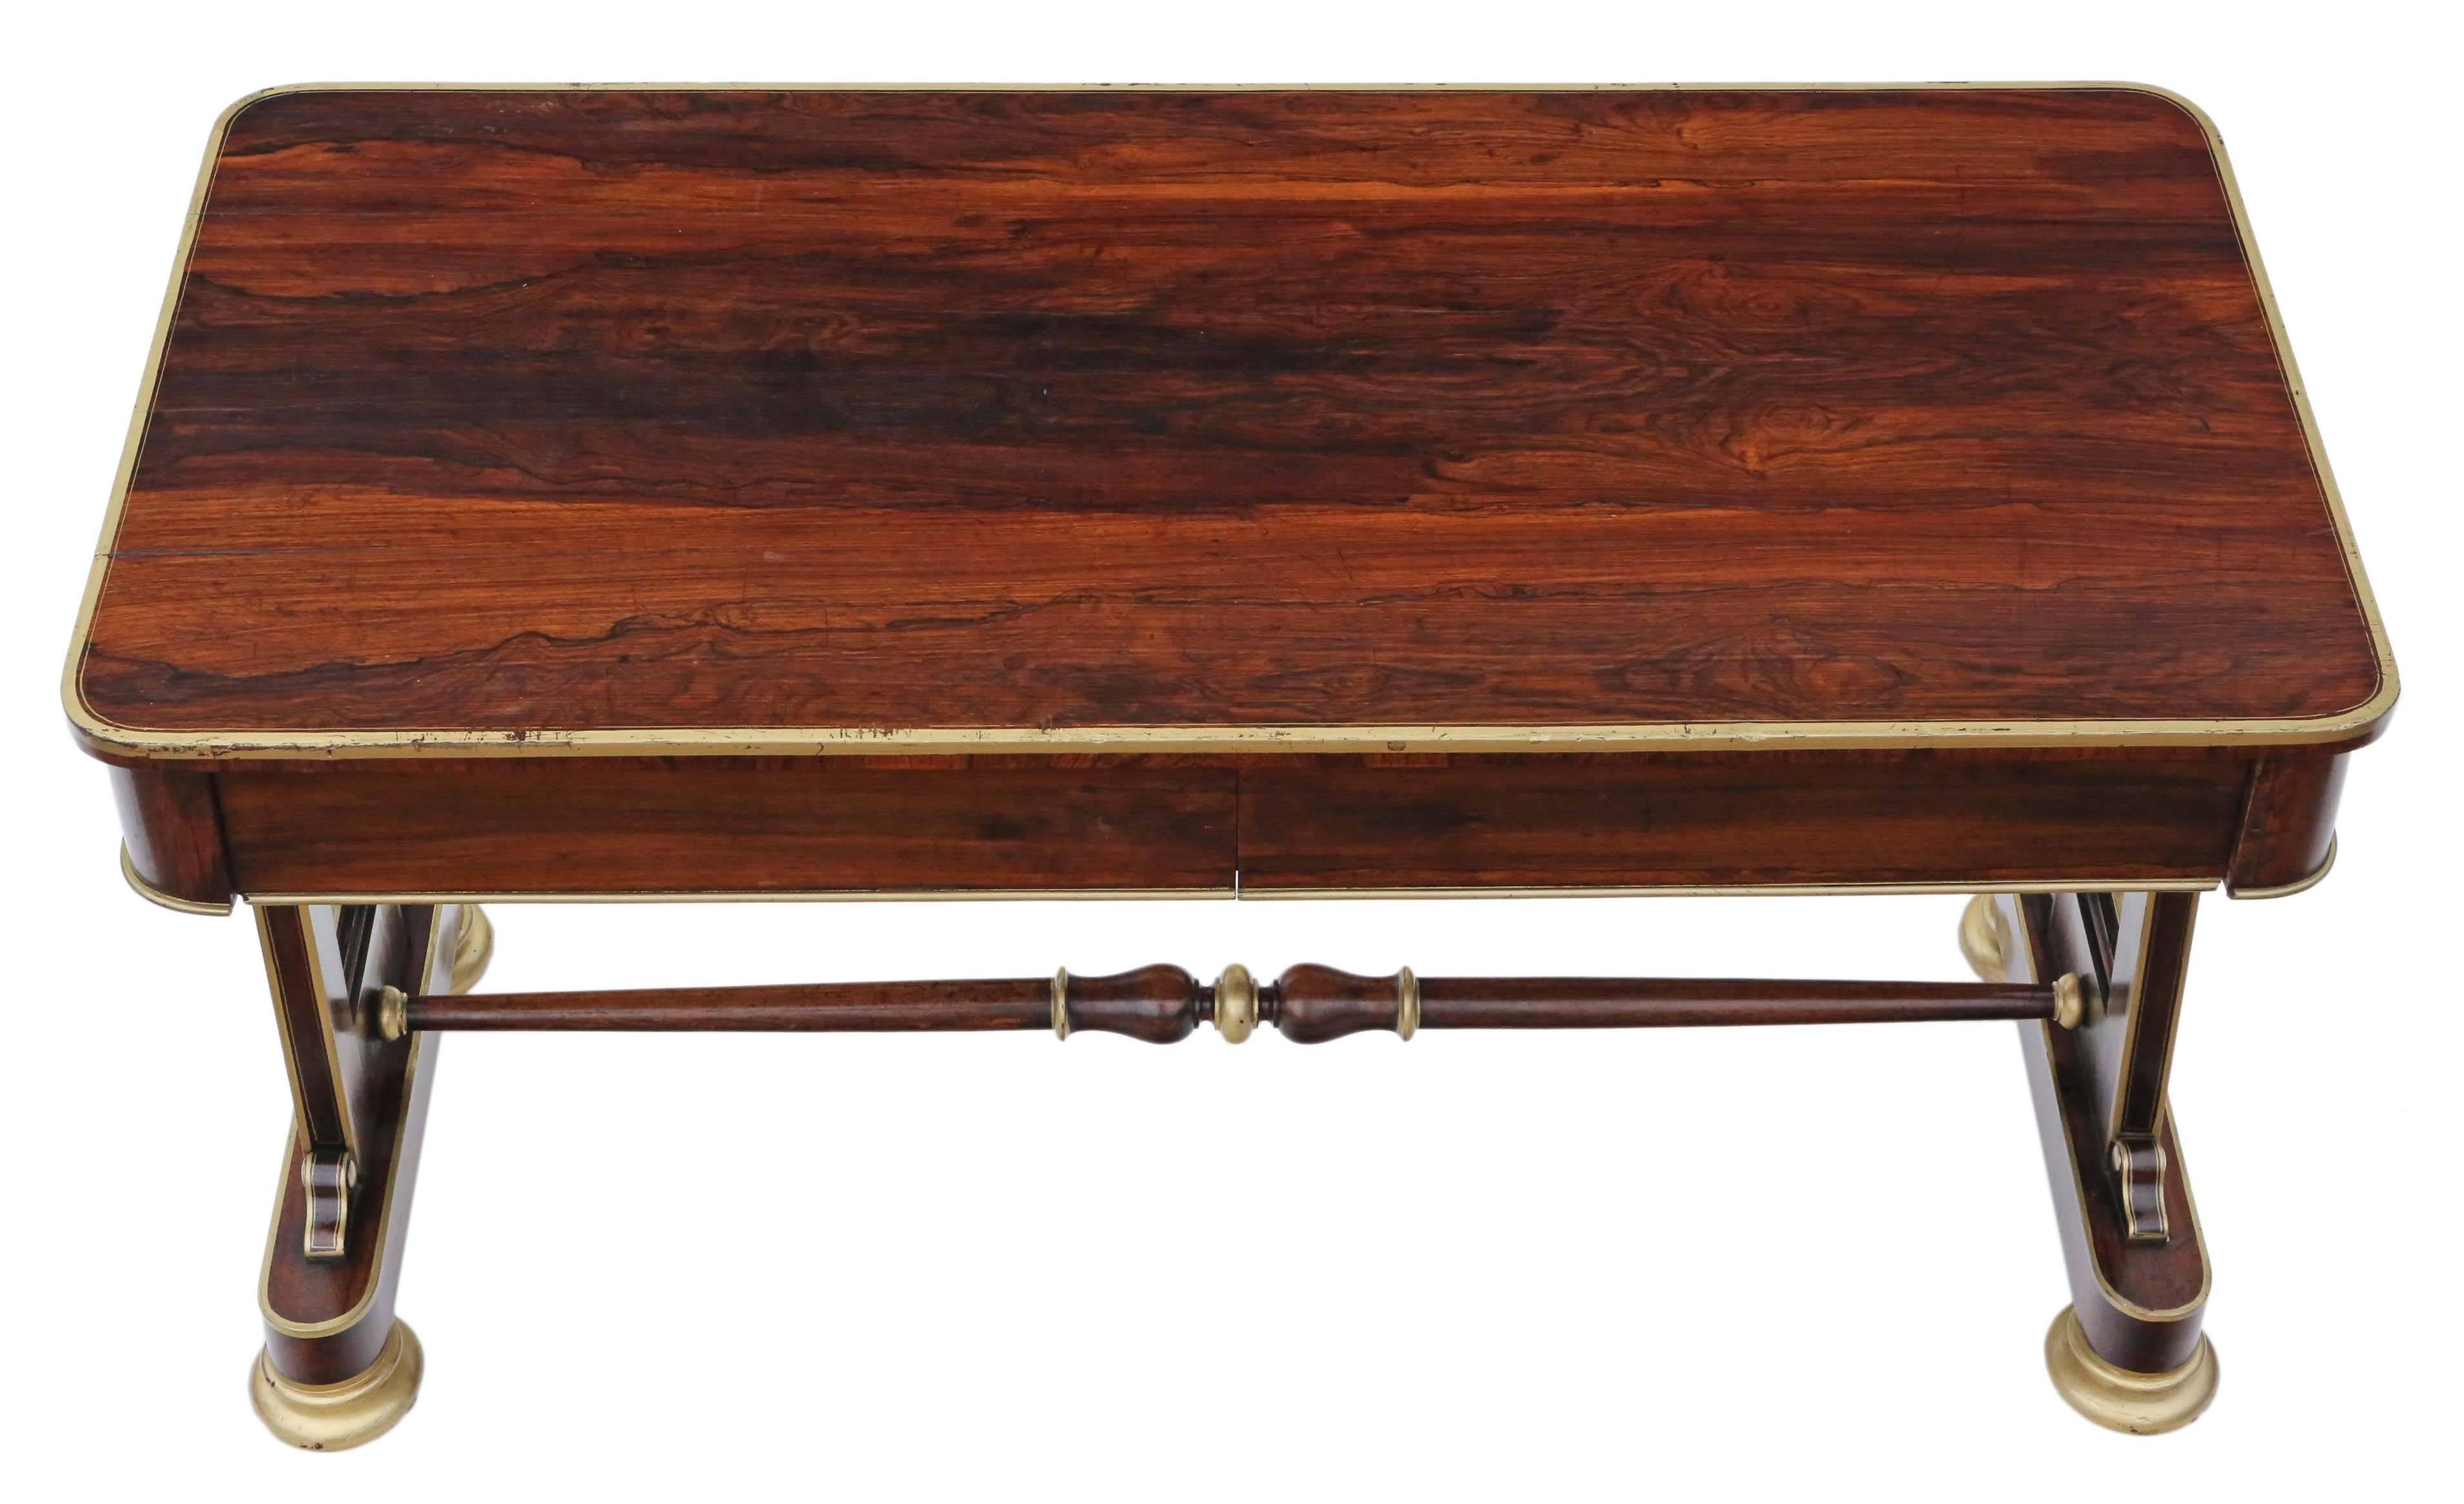 Antique quality Regency circa 1825 rosewood library desk writing table. Two blind oak lined drawers to one side, which slide freely.

Solid and strong, with no loose joints. Full of age, character and charm. Attractive stretcher base with period